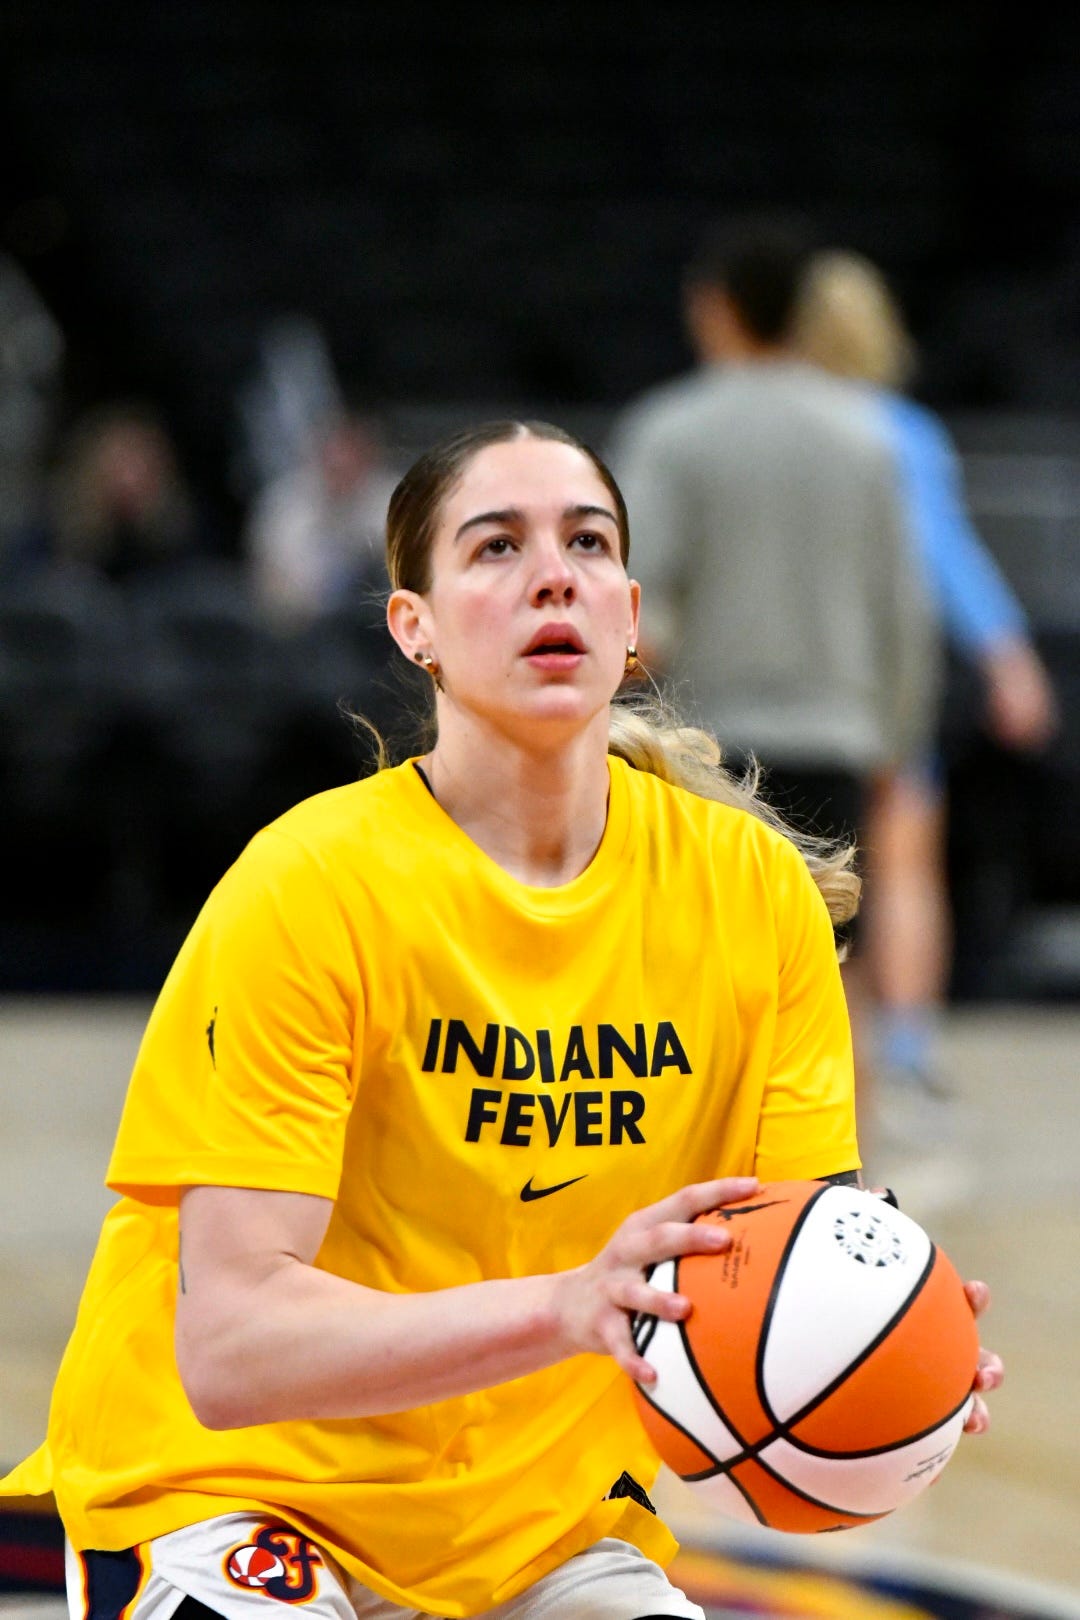 Emily Engstler has grown into a star for SU after turbulent freshman year